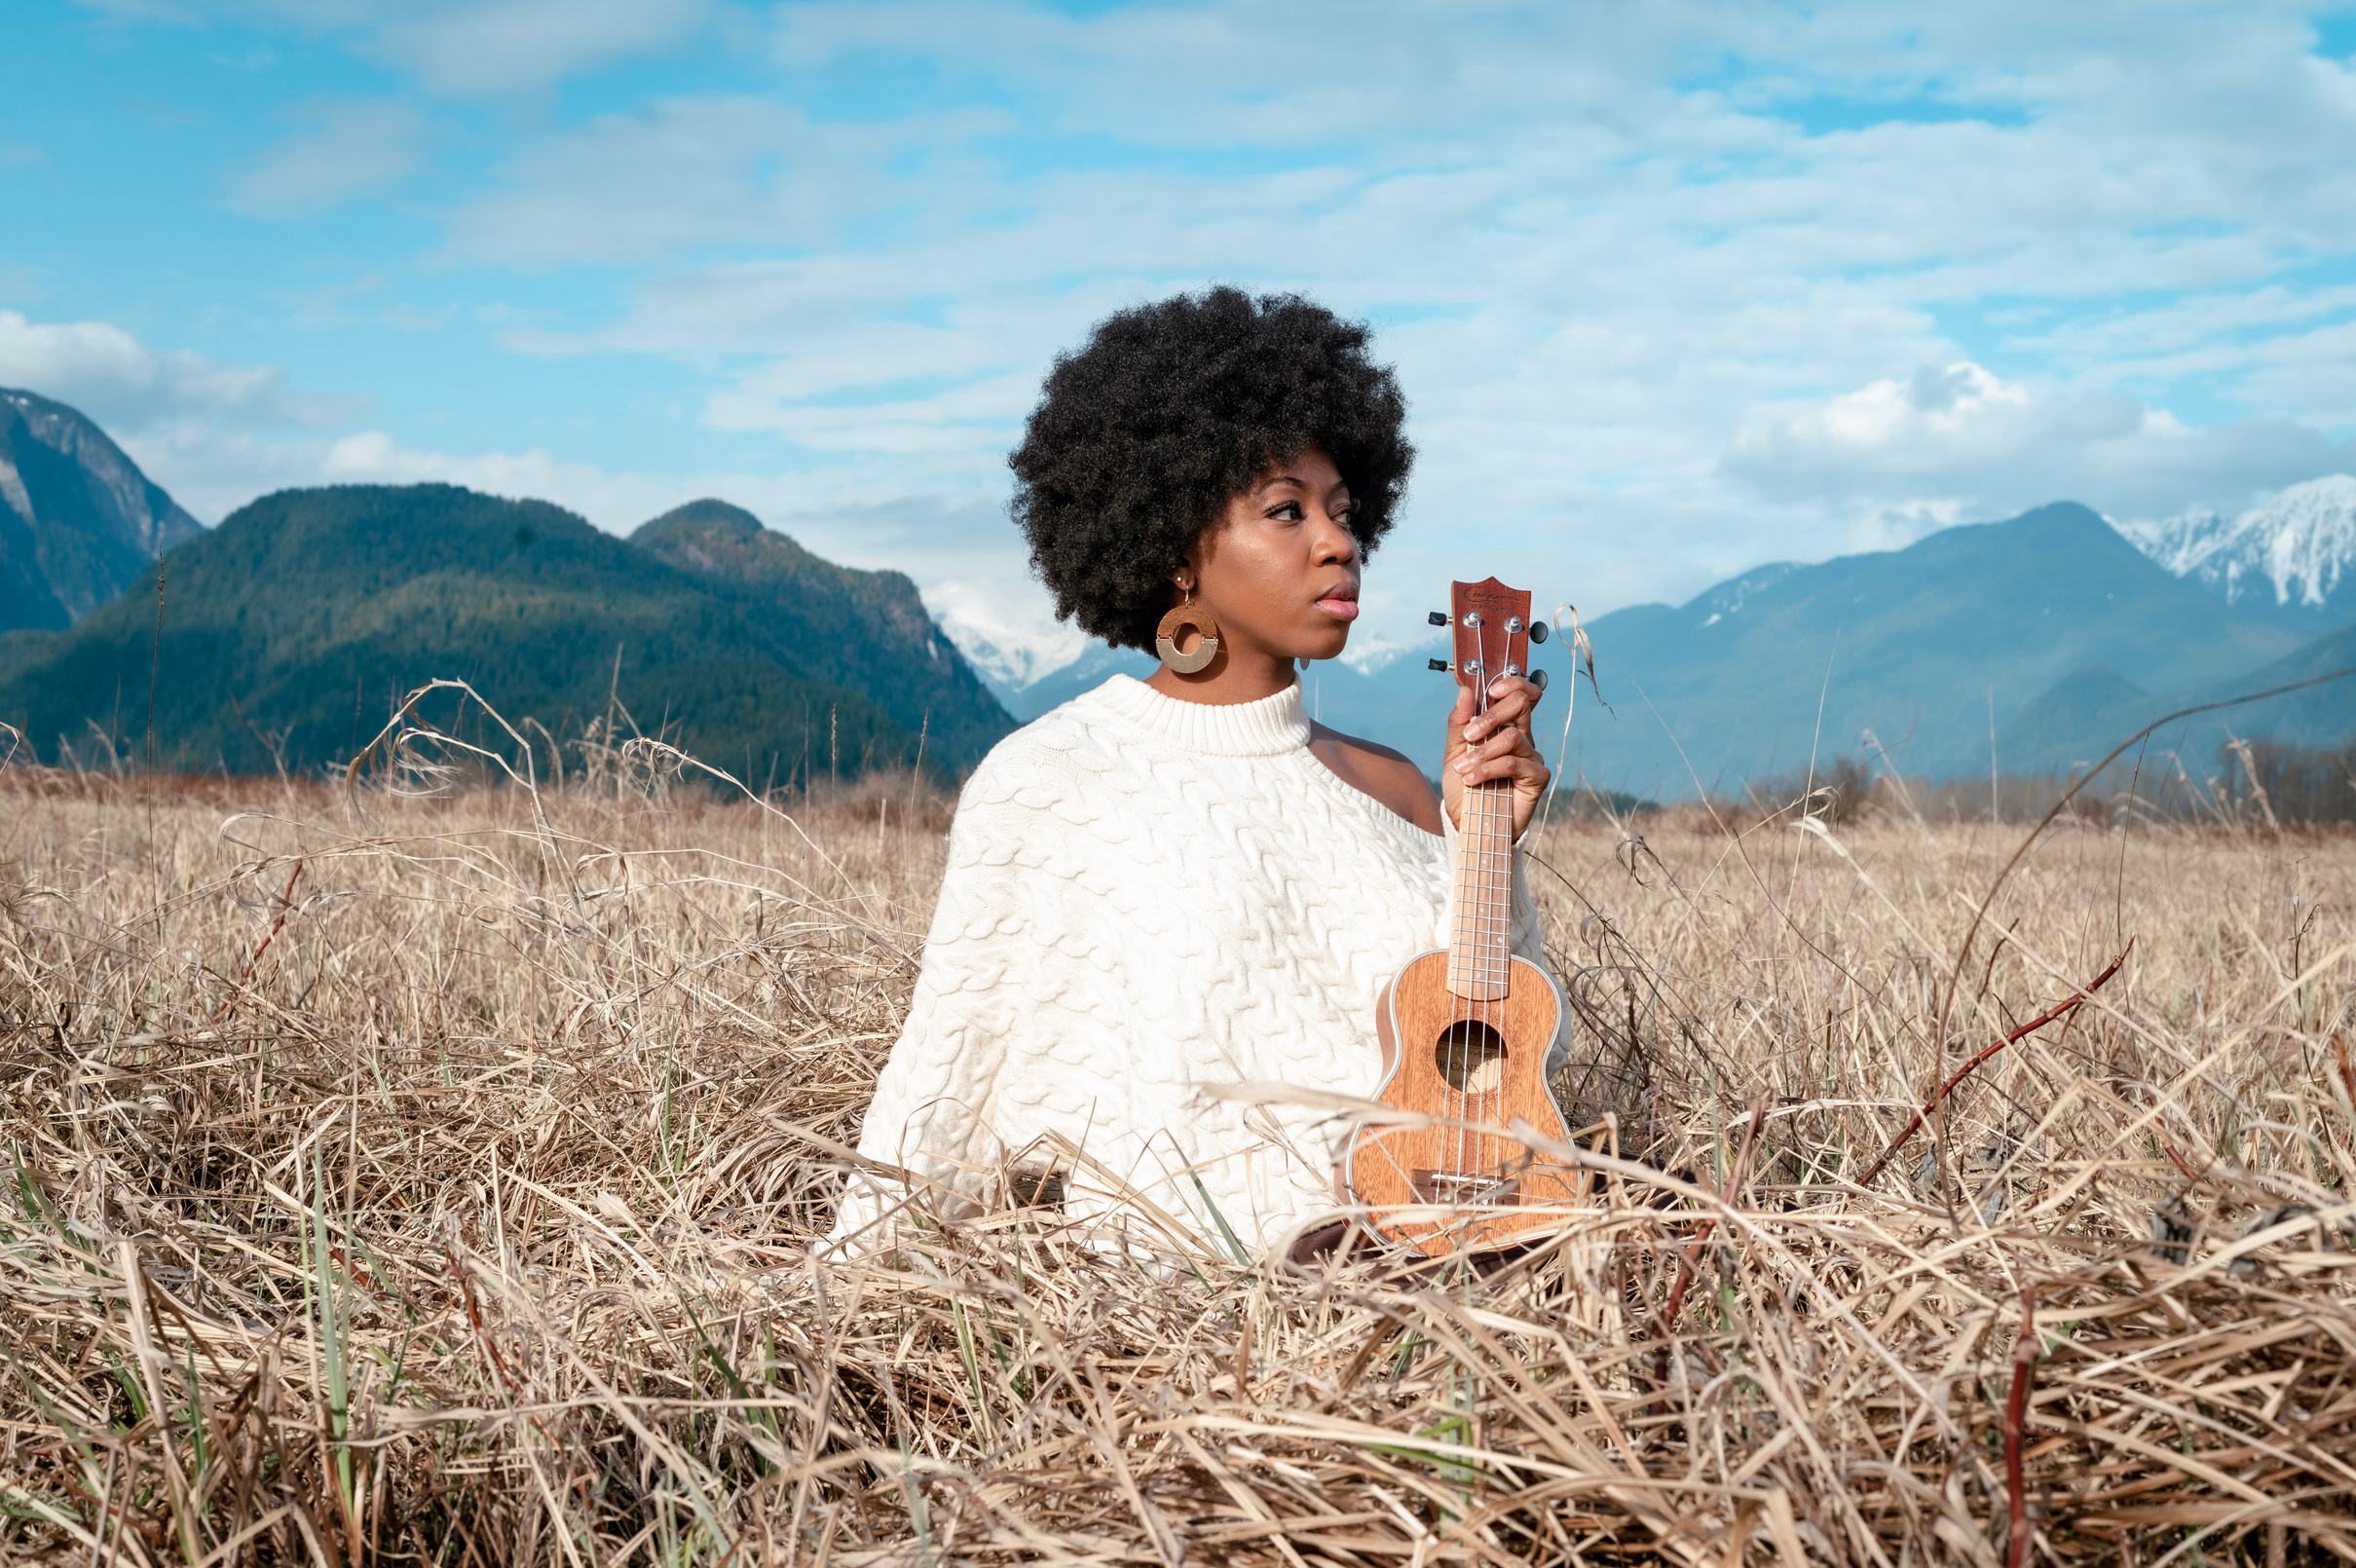 Woman in a White Sweater Holding a Ukulele while Looking Away